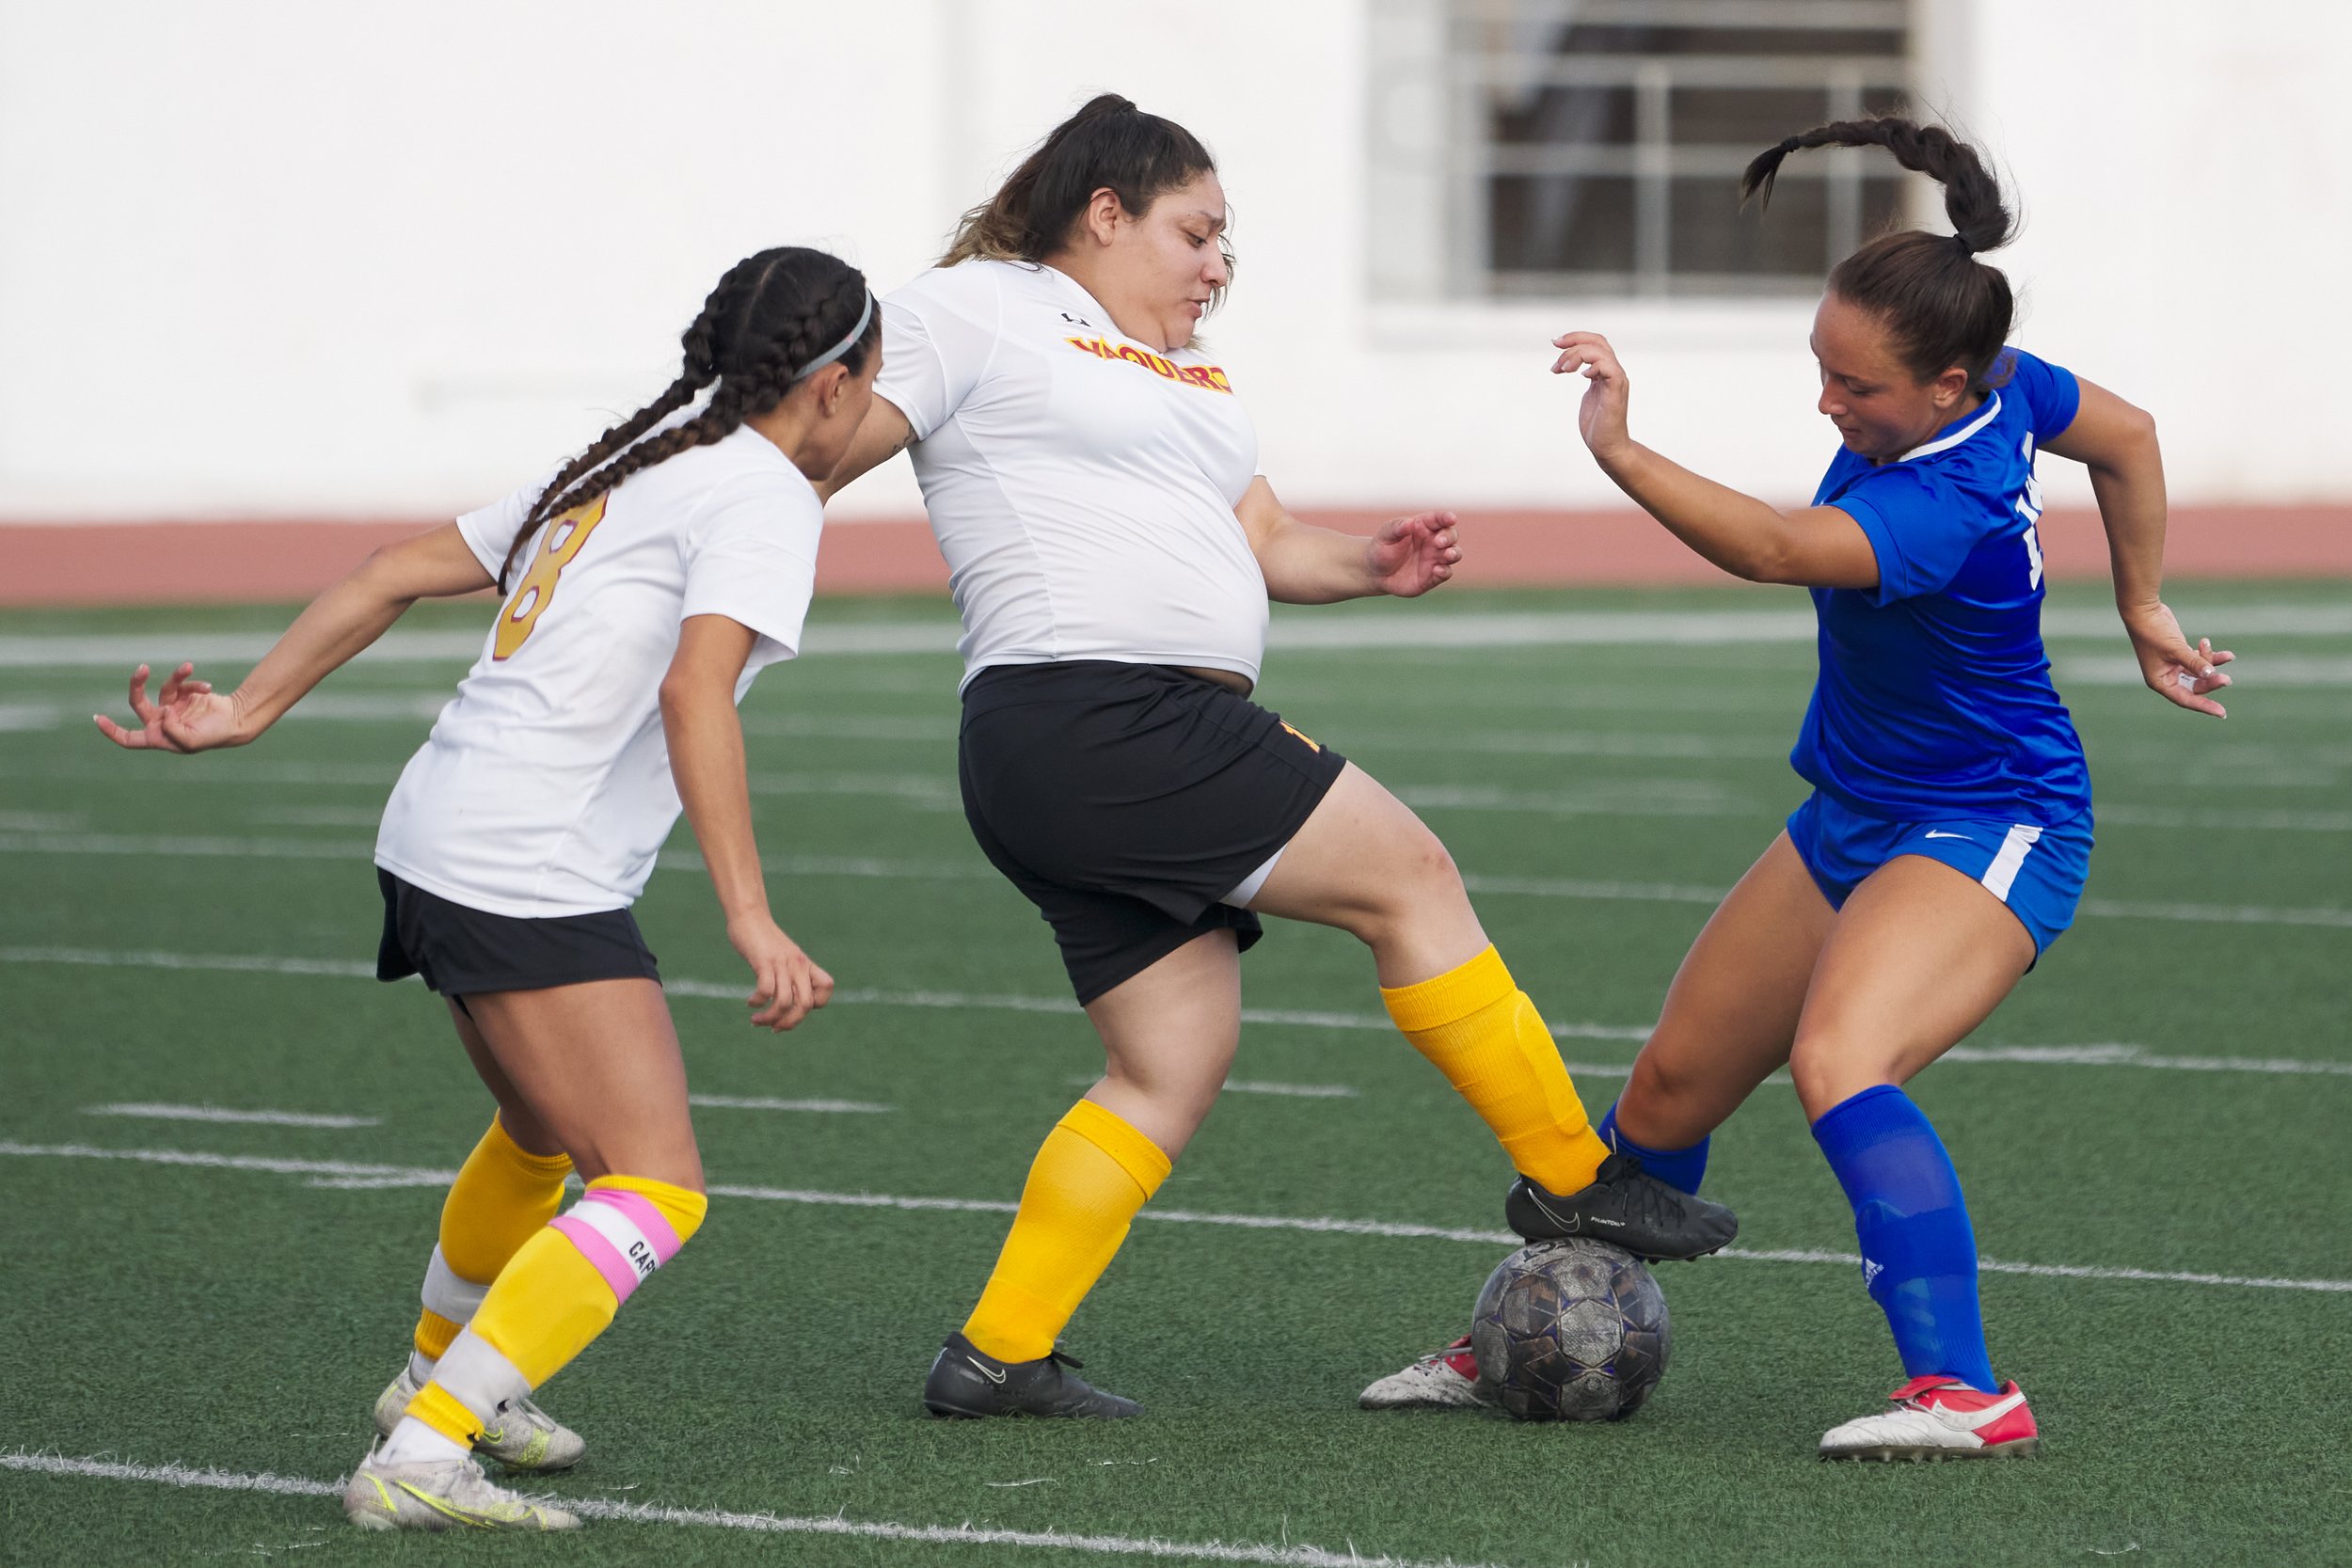  Glendale Community College Vaqueros' Vannessa Gallegos (center), with Isabel Moran (left), steals the ball from Santa Monica College Corsairs' Layla Perovich (right) during the women's soccer match on Friday, Oct. 21, 2022, at Corsair Field in Santa